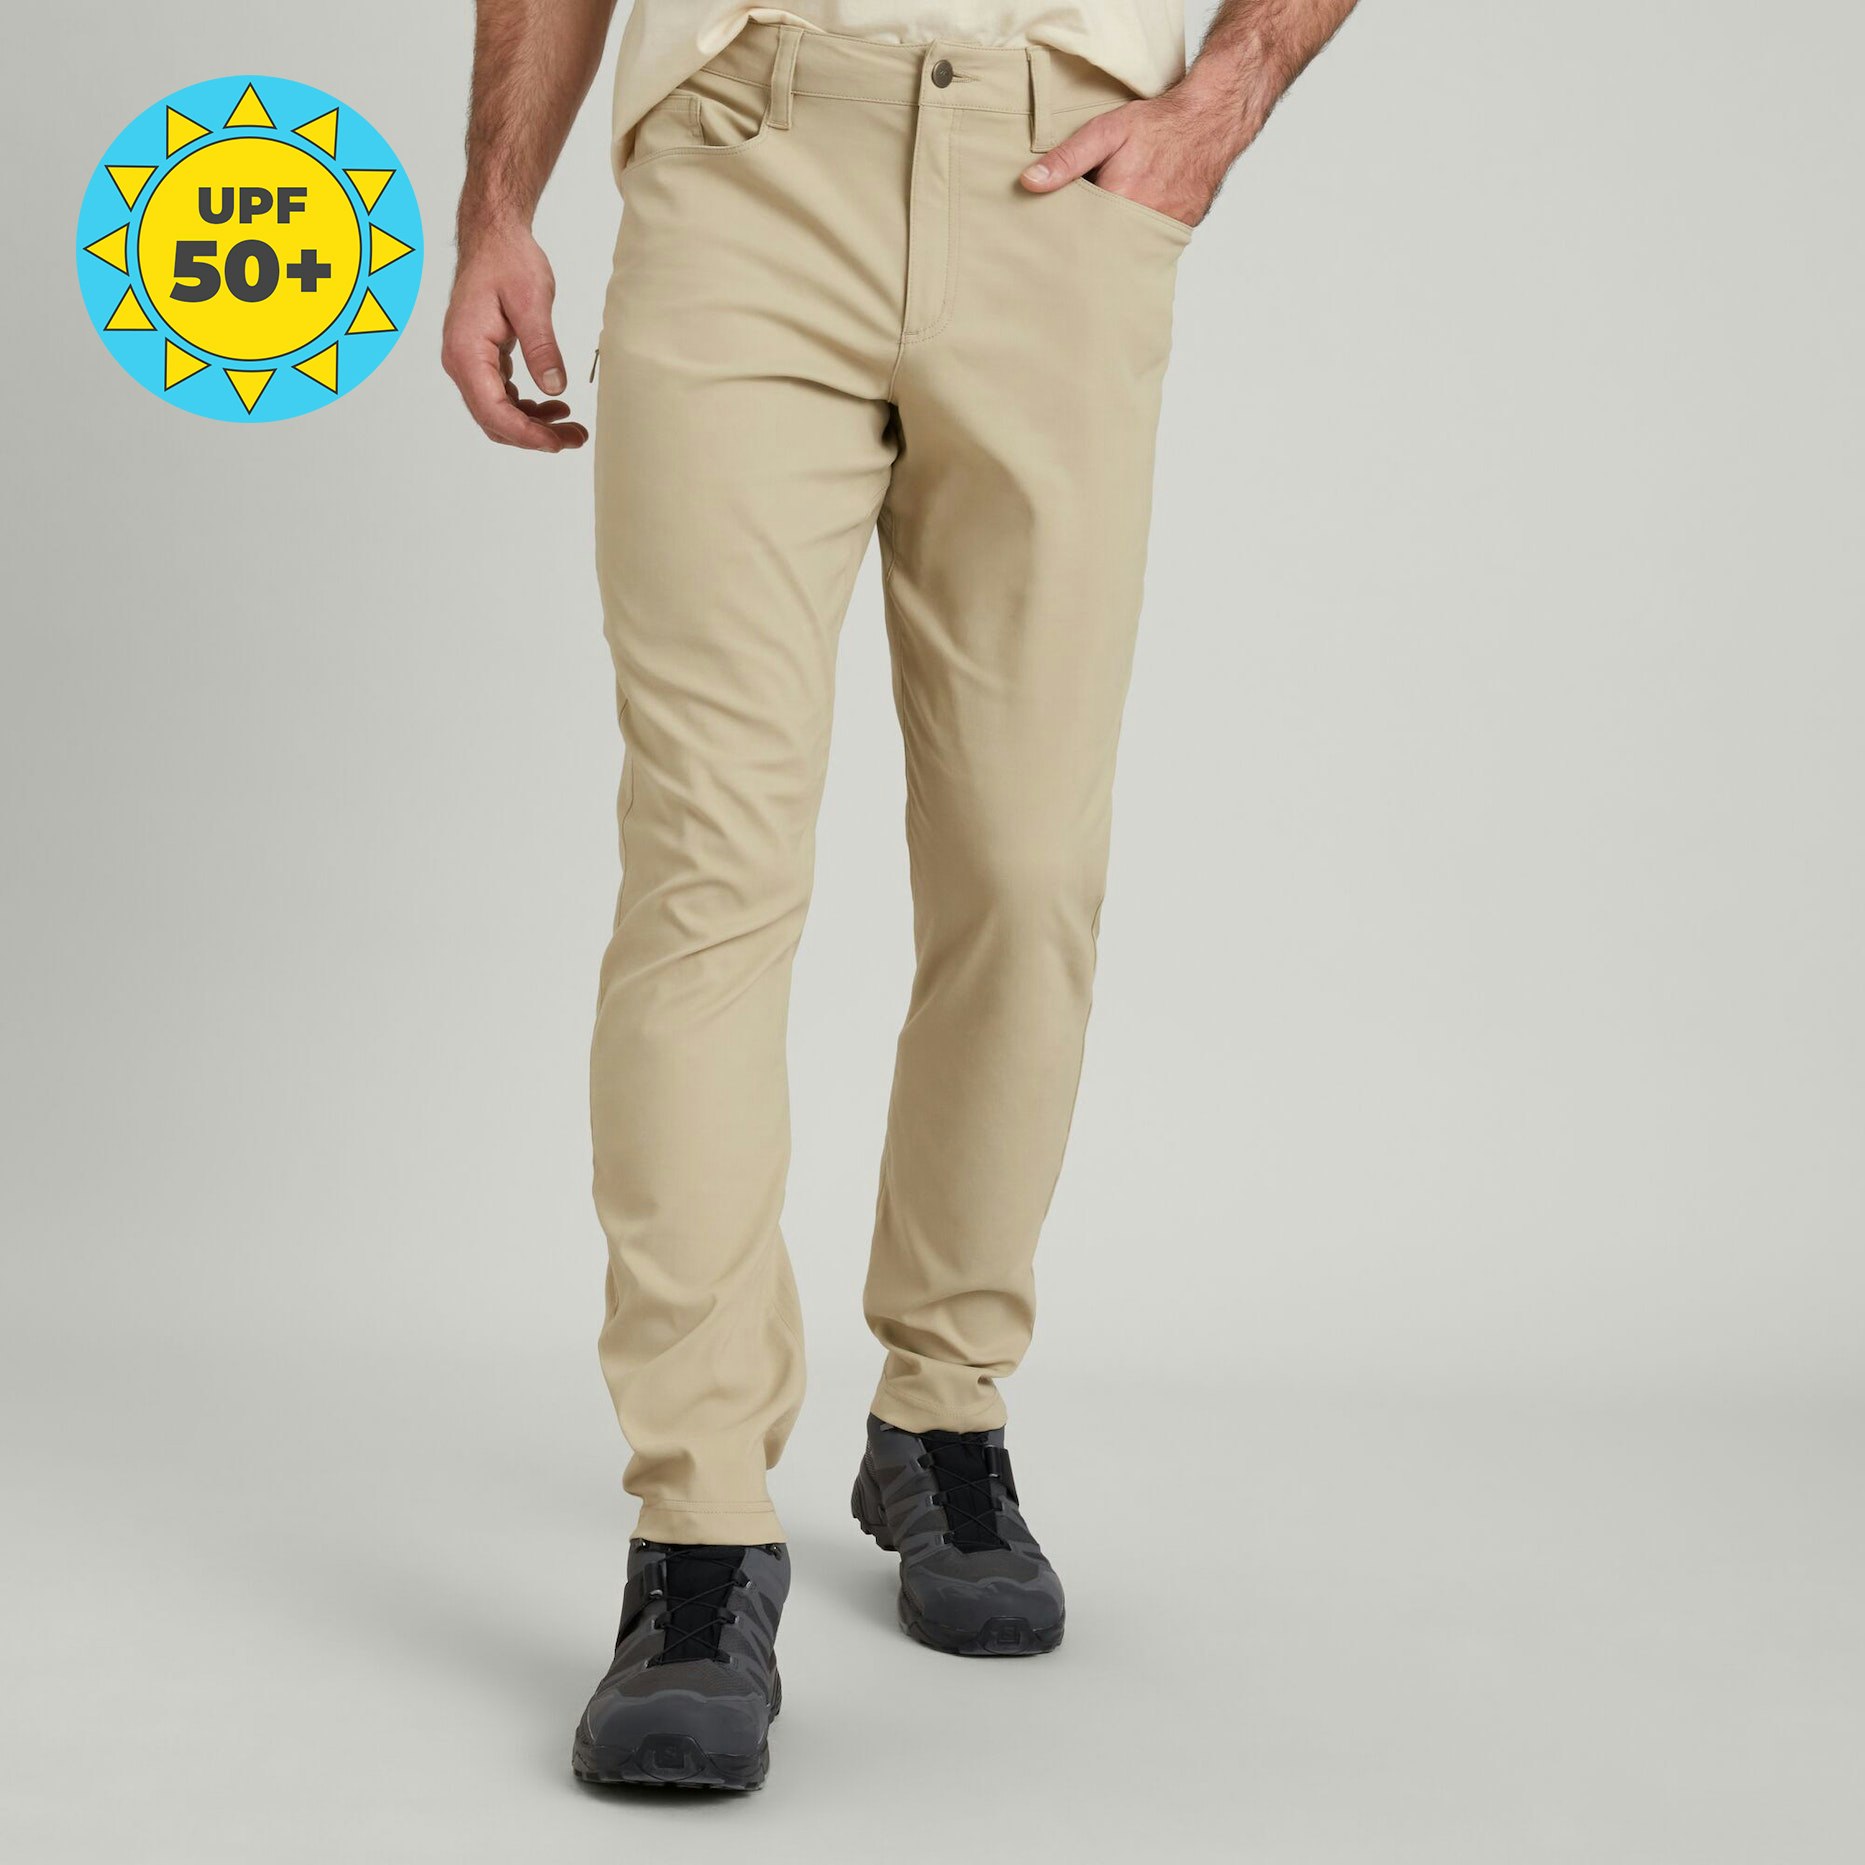 Jackson Quick-Dry Trousers | Outfoor Clothing Men | Orvis UK